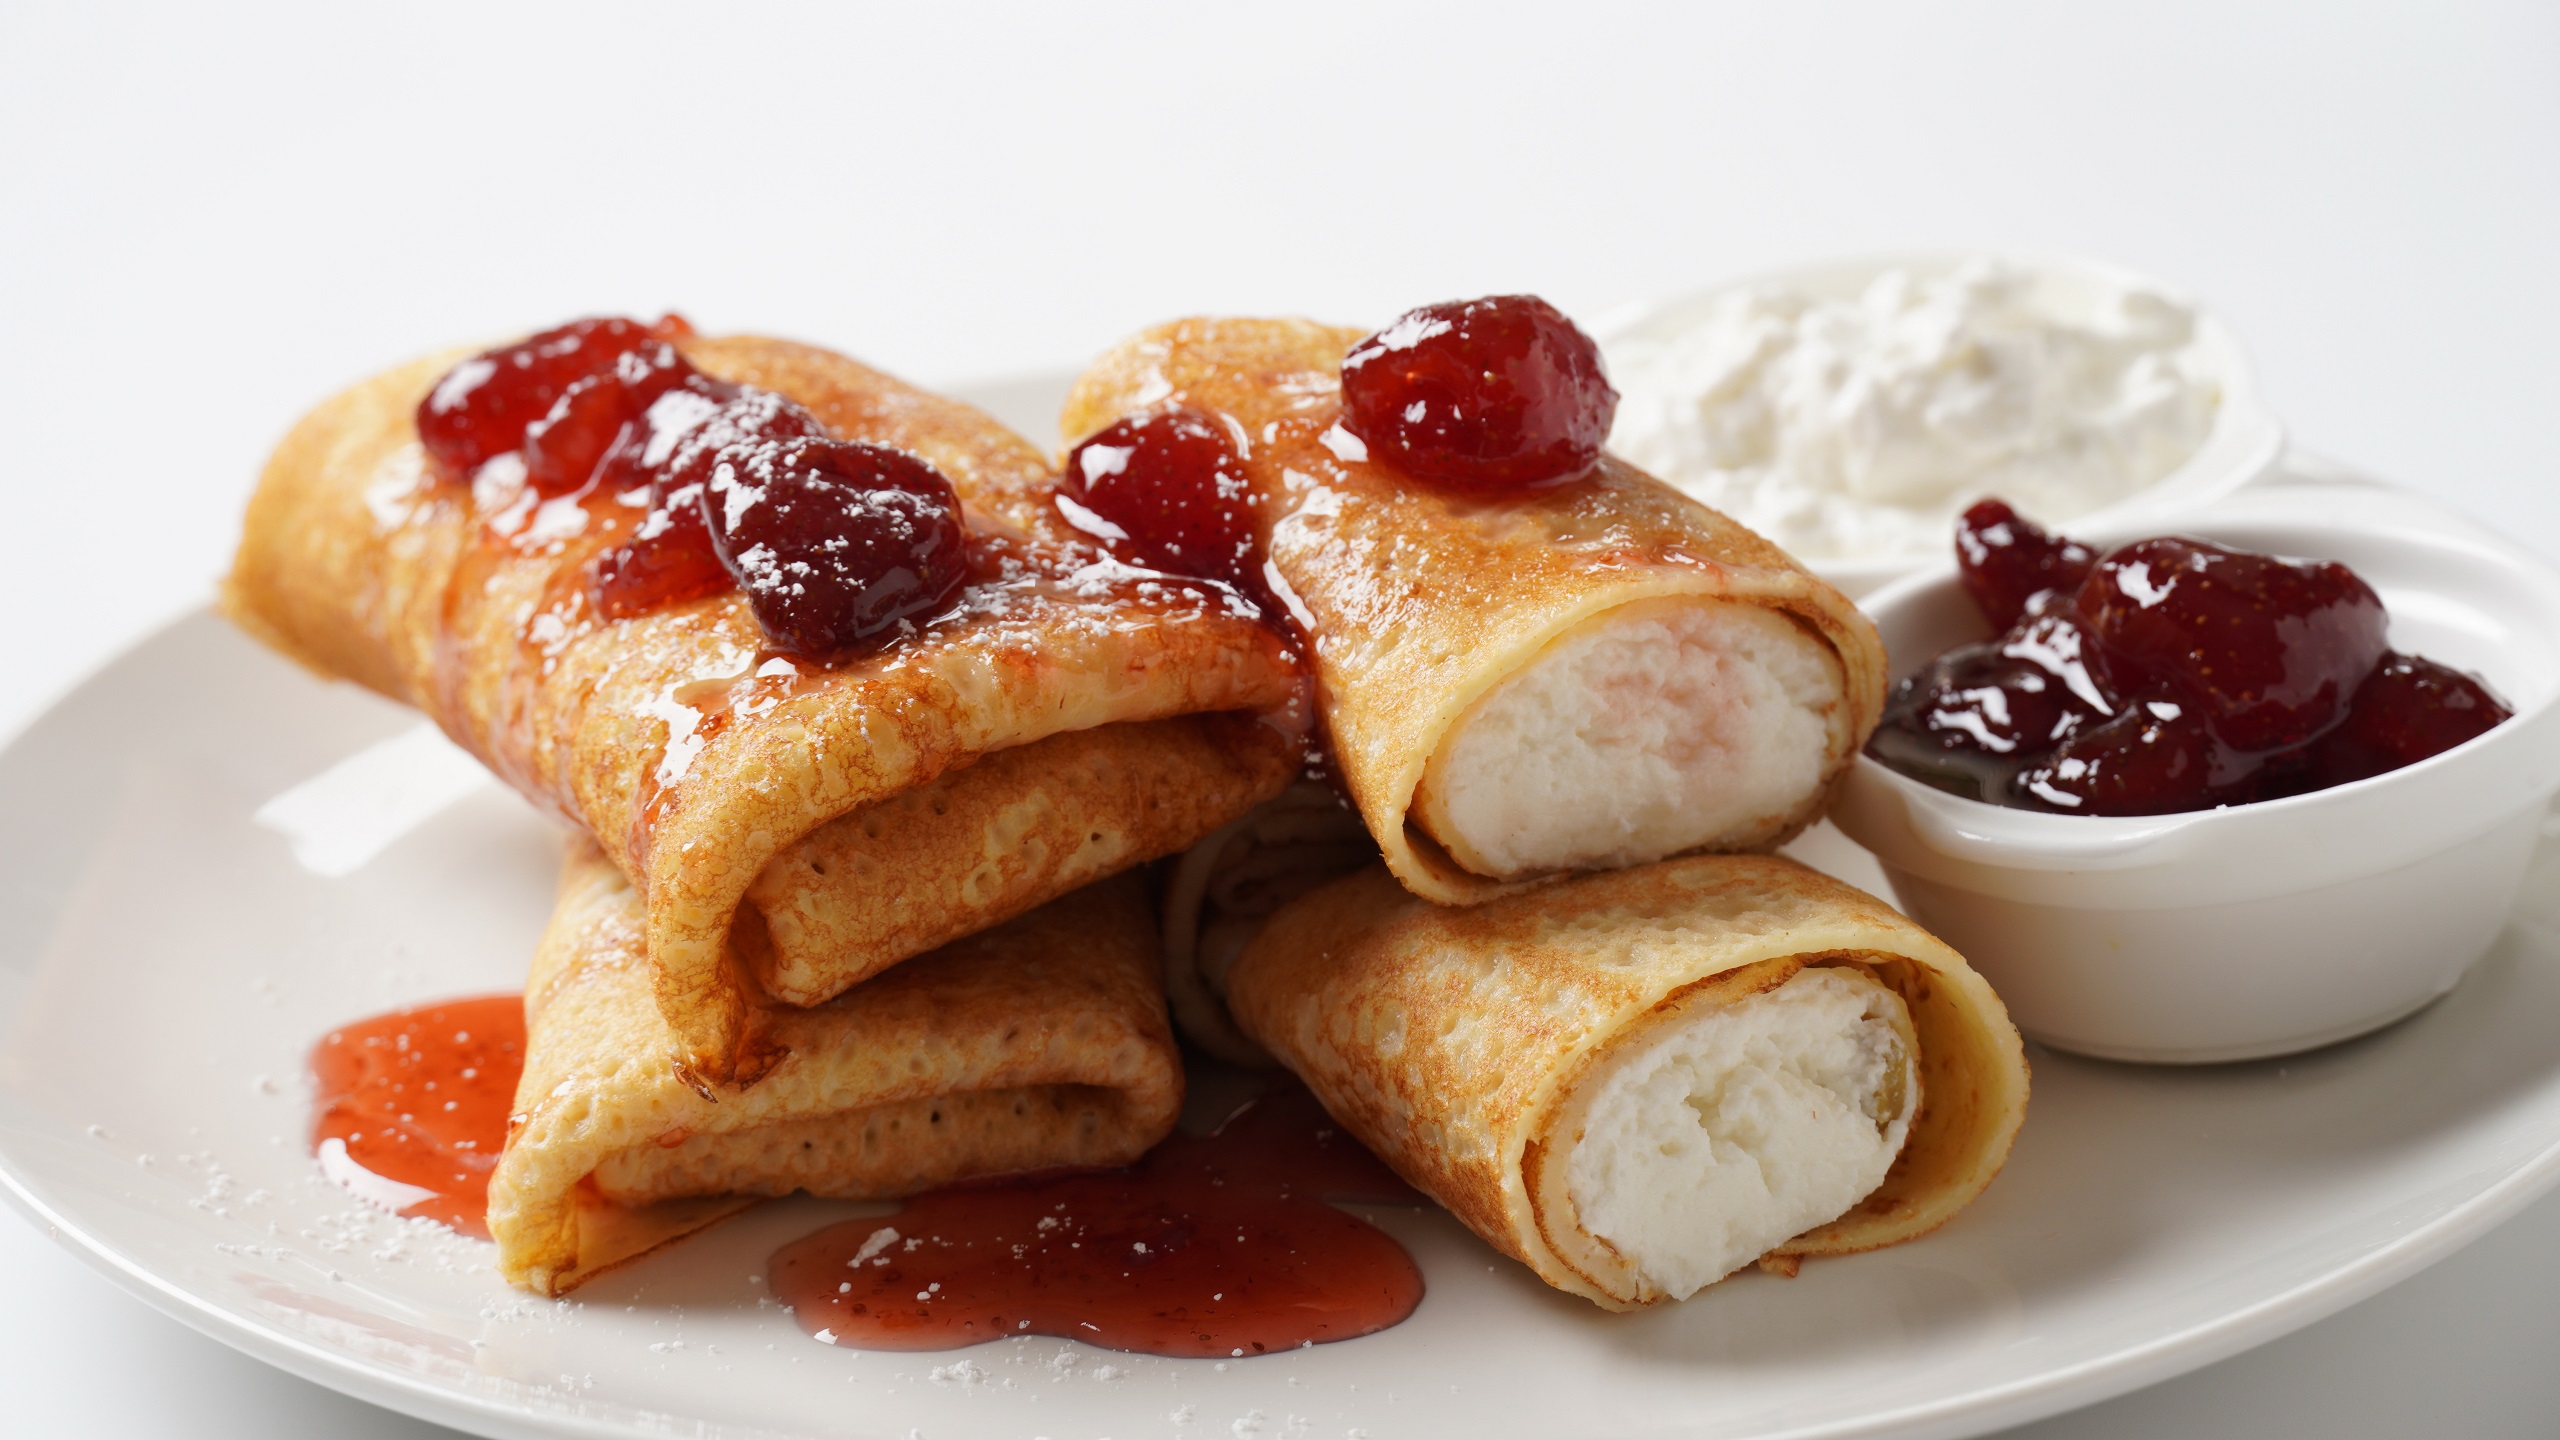 Sweet cheese blintzes stacked on a white spread with the cheese filling showing and natural fruit jam spread across the top row of blintzes on a white background.